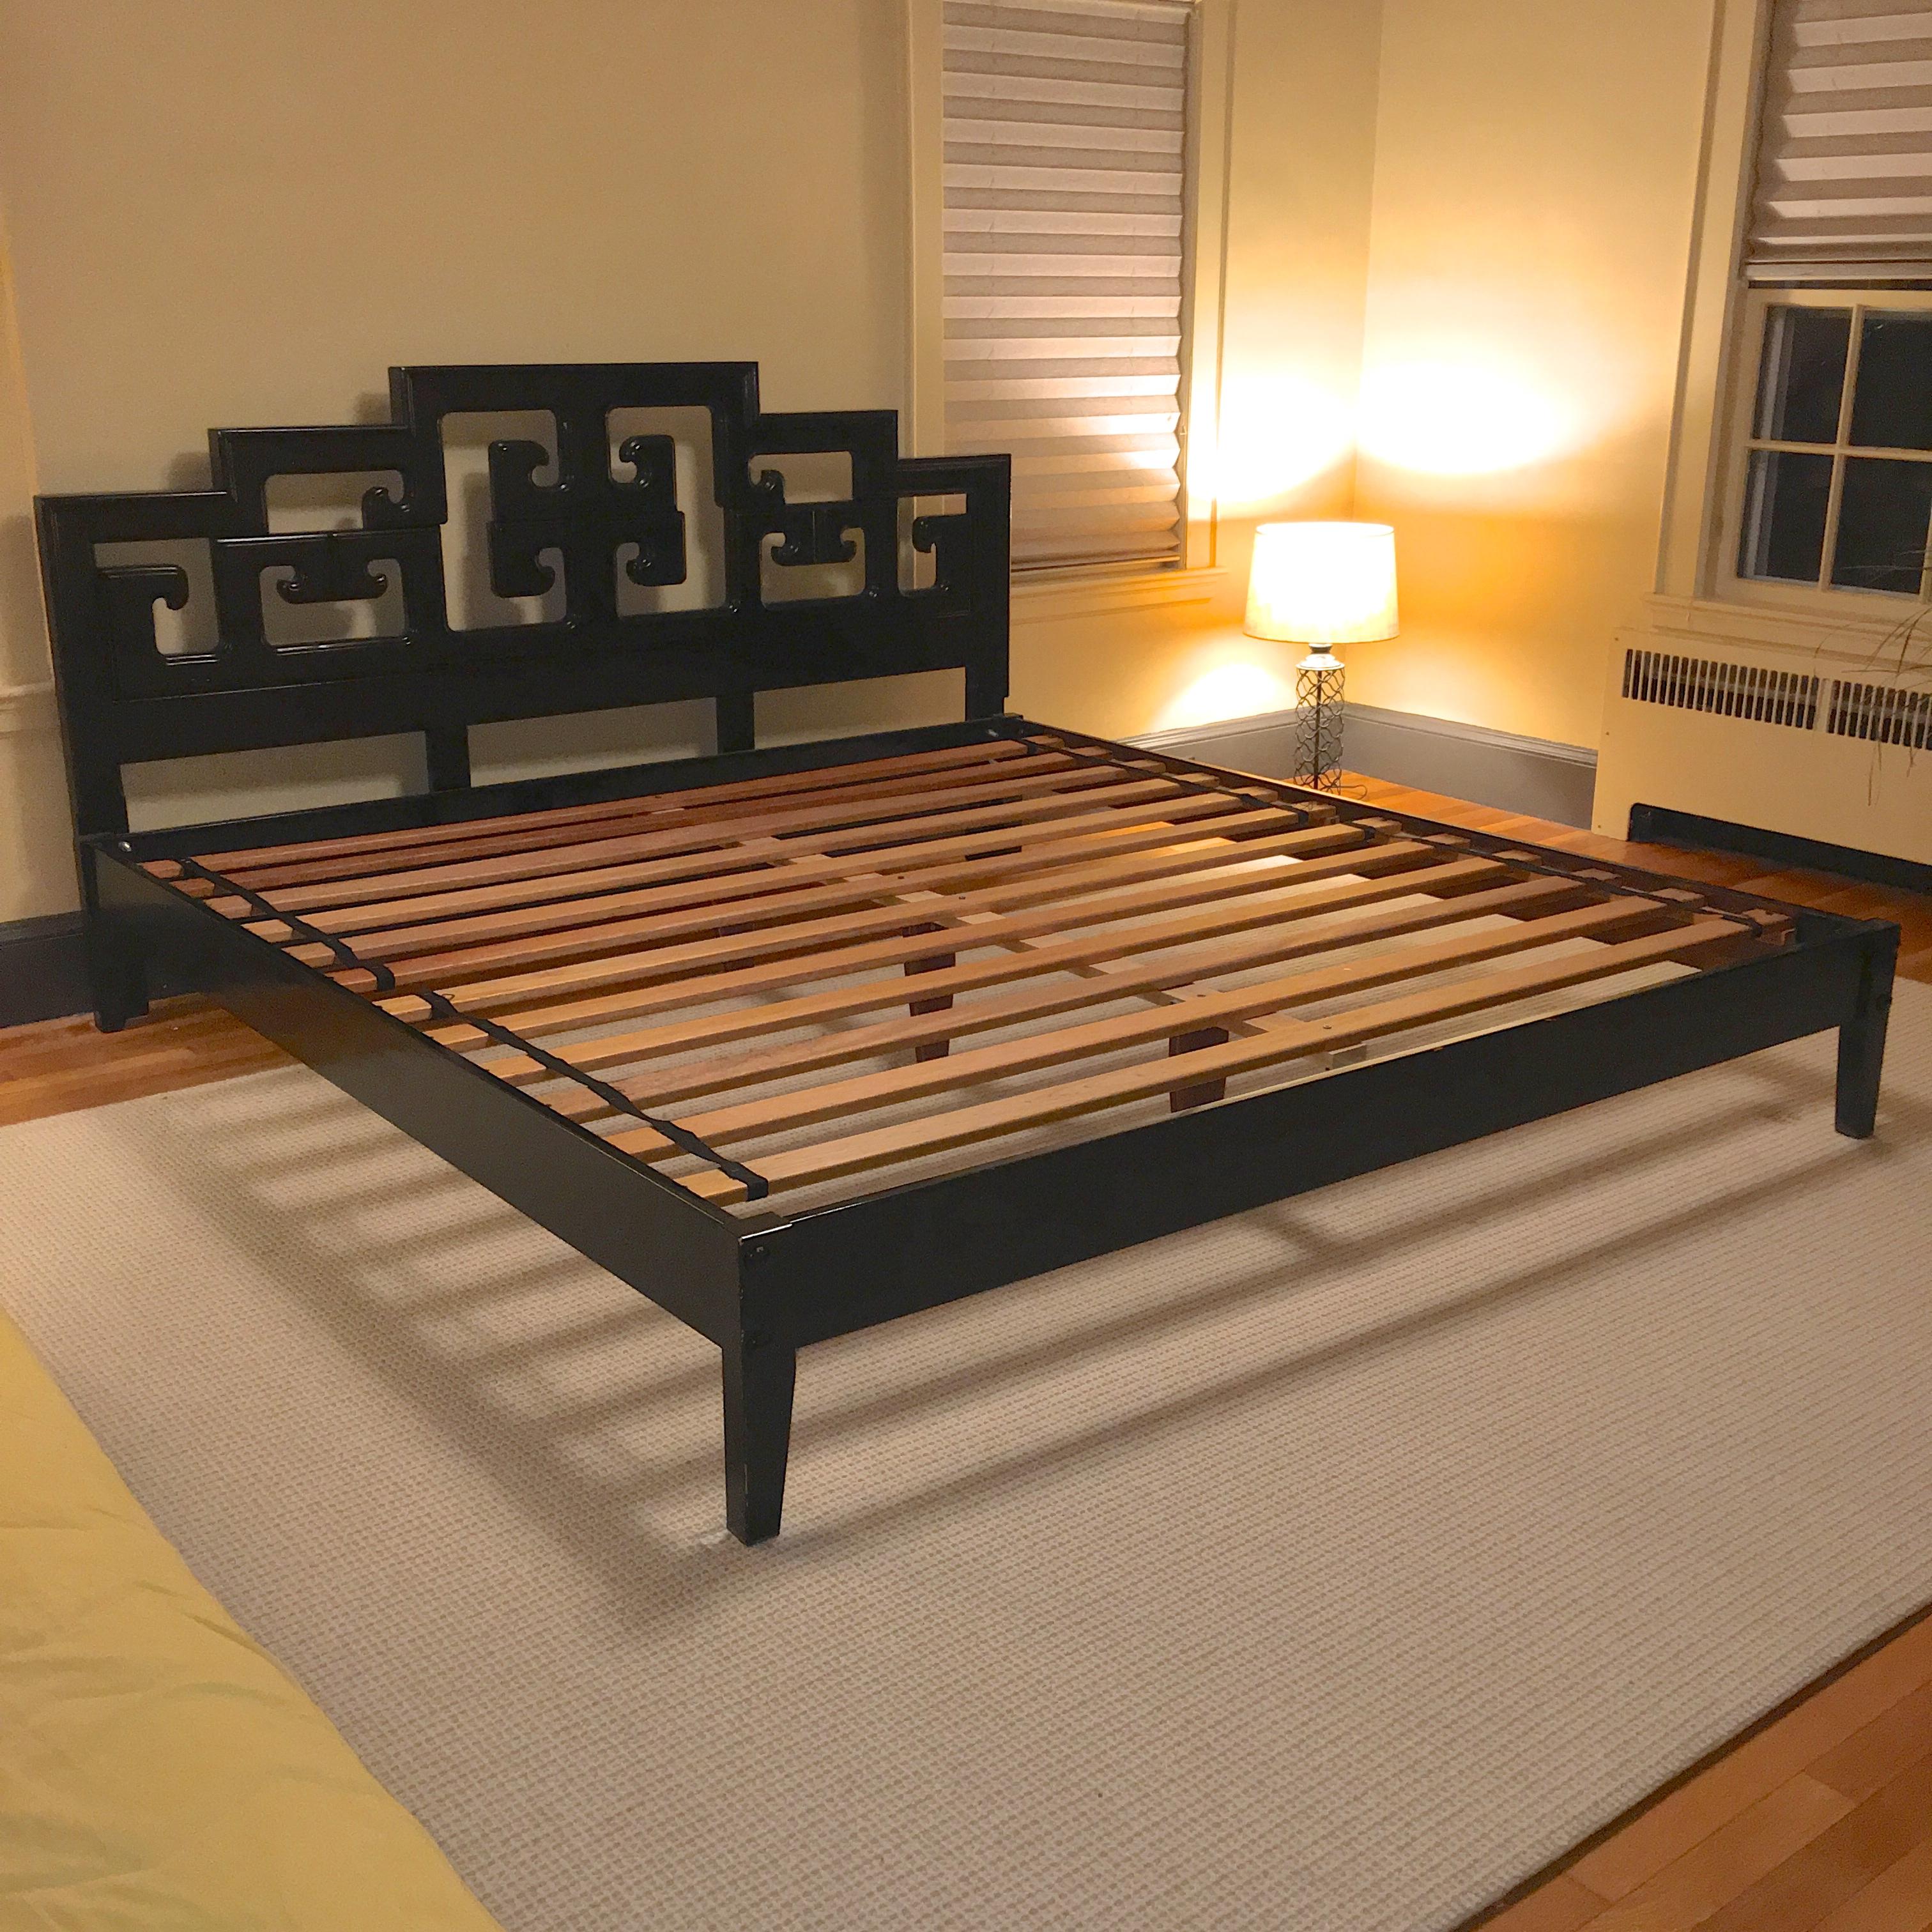 Century Furniture Hollywood Regency Asian style king-size platform bed with graphic headboard in black enamel.

Dimensions are 84